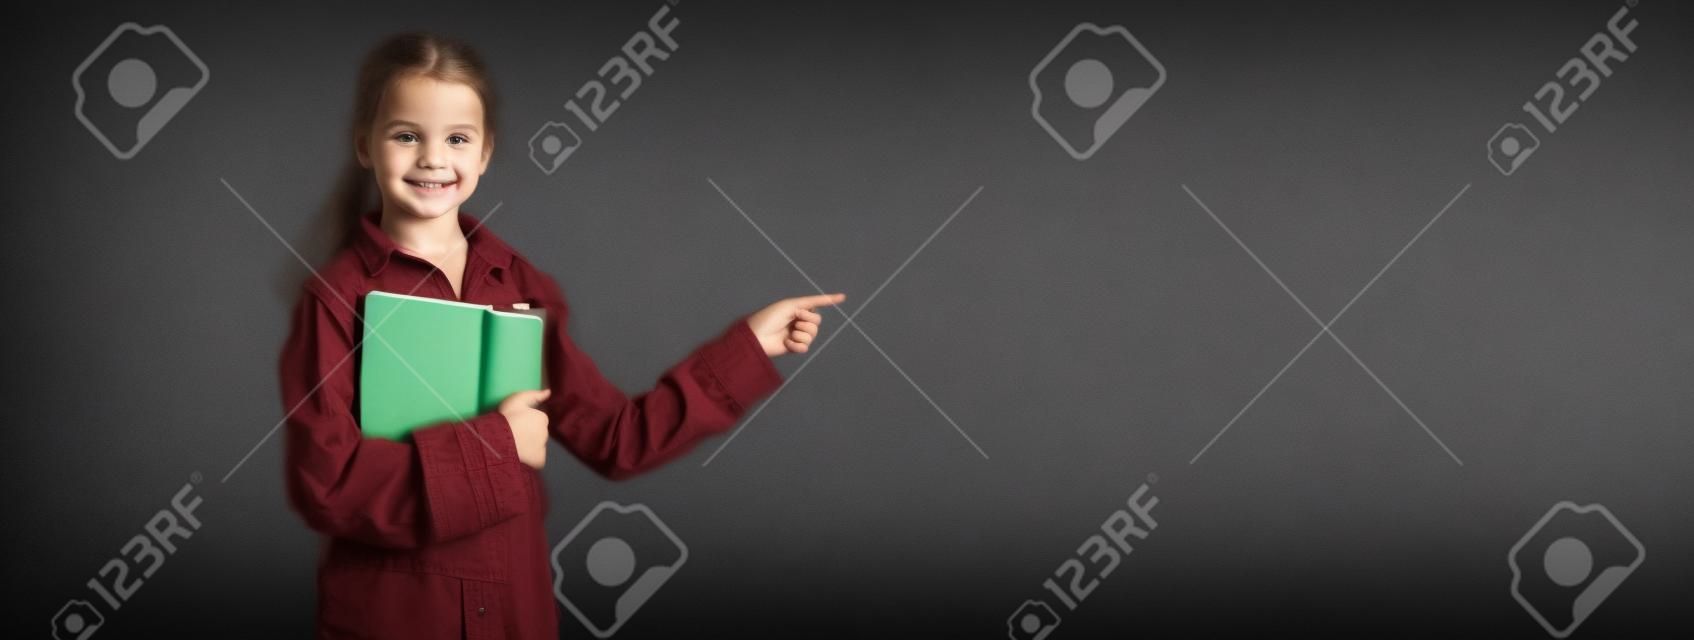 caucasian girl student in the classroom near the chalk board. Holds a notebook smiling indicates an empty space for the text. Online education and e-learning concept. Back to school. banner.